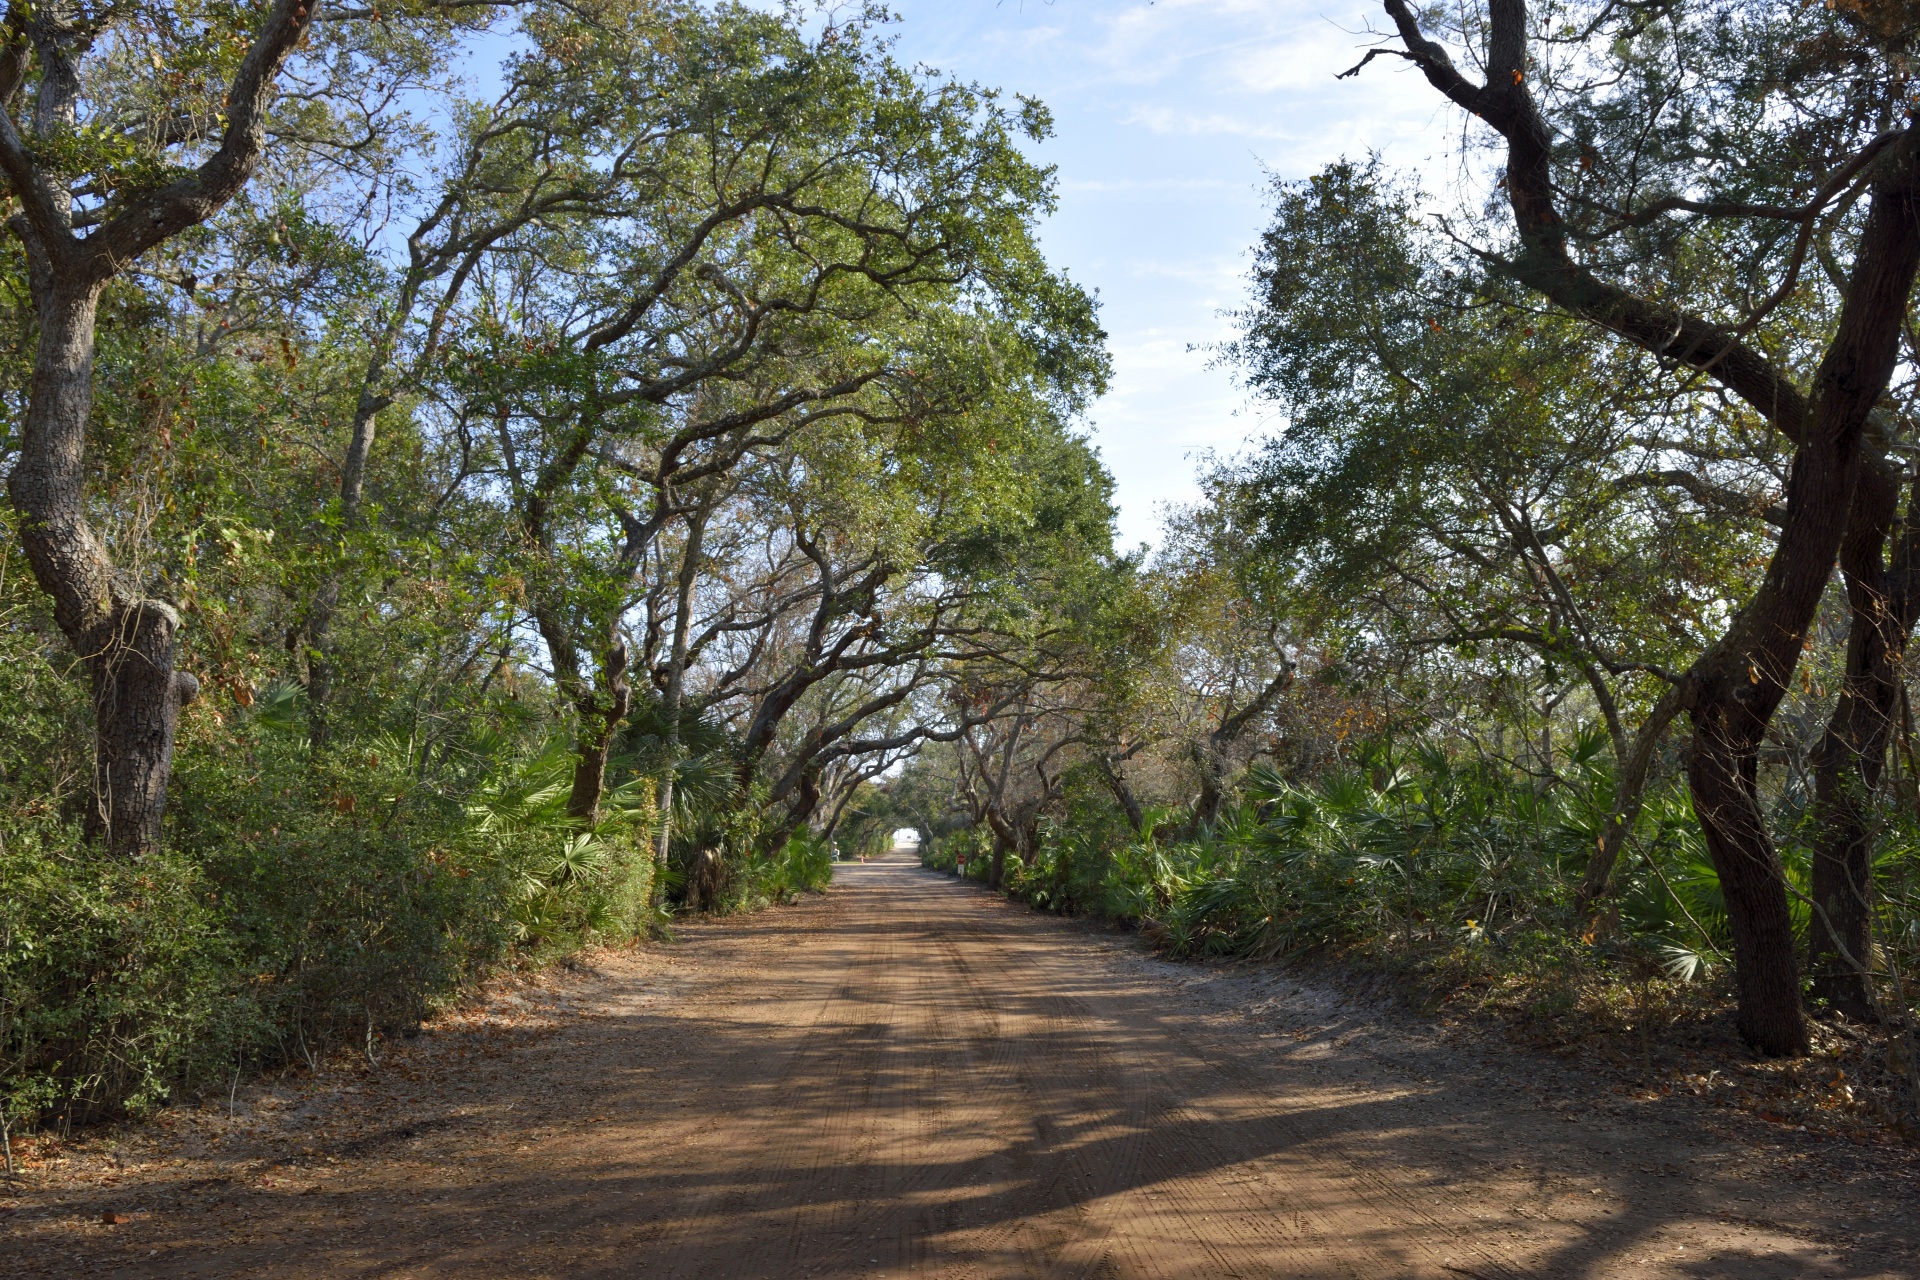 Dirt road with Hammock trees